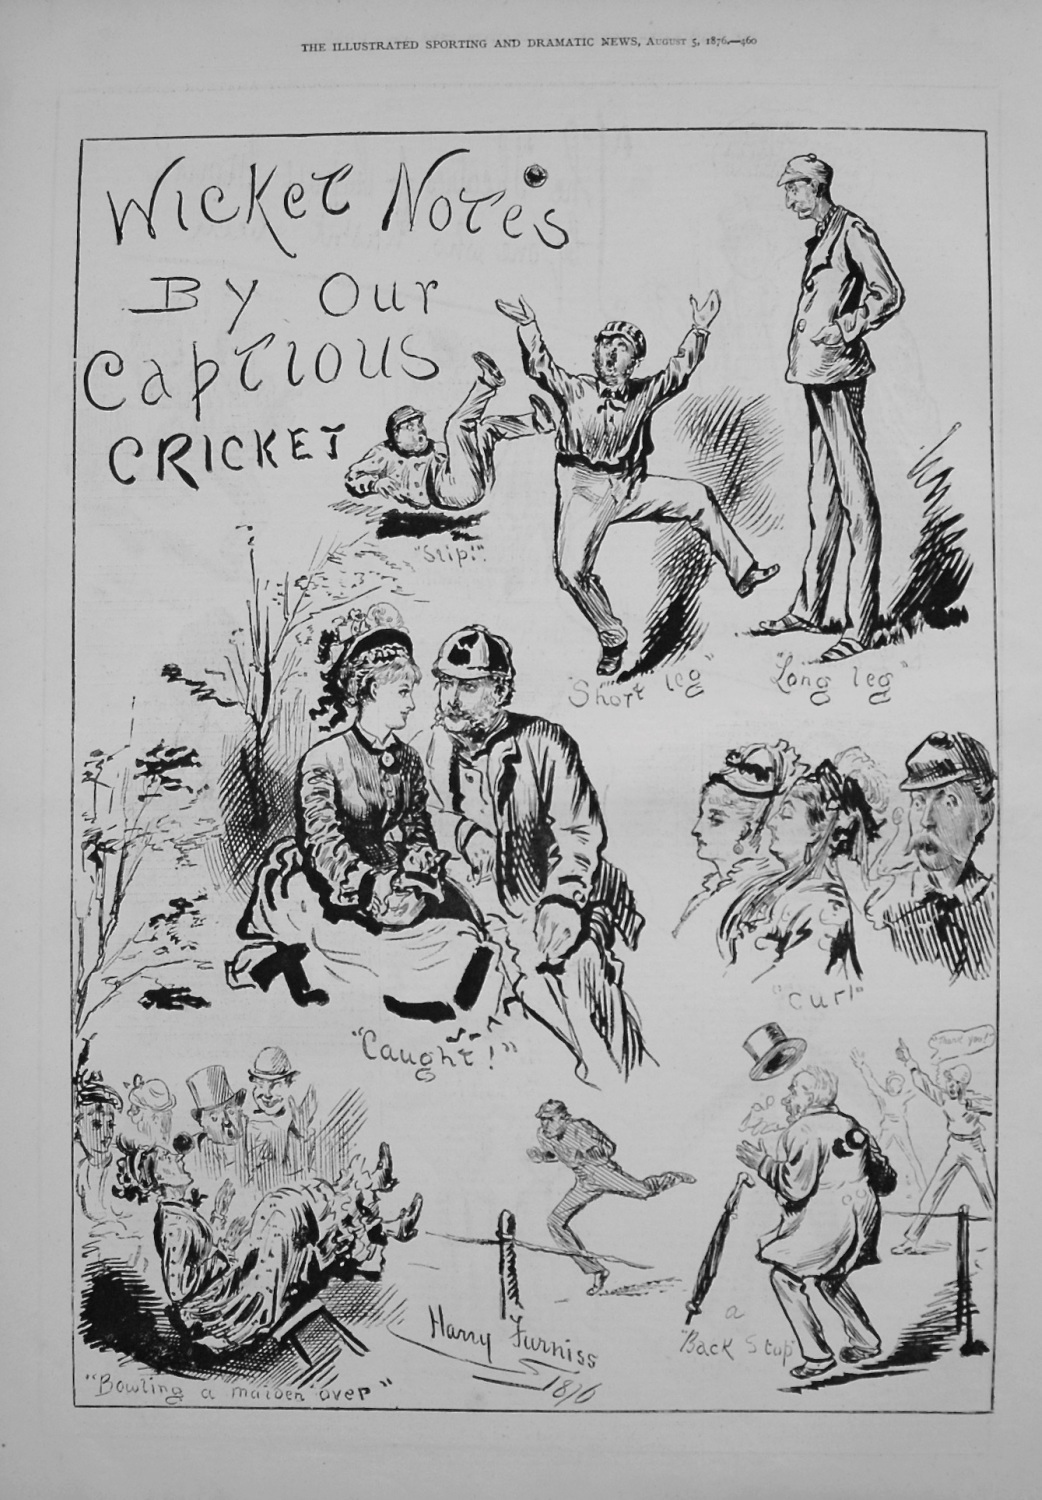 Wicket Notes by our Captious Cricket. 1876